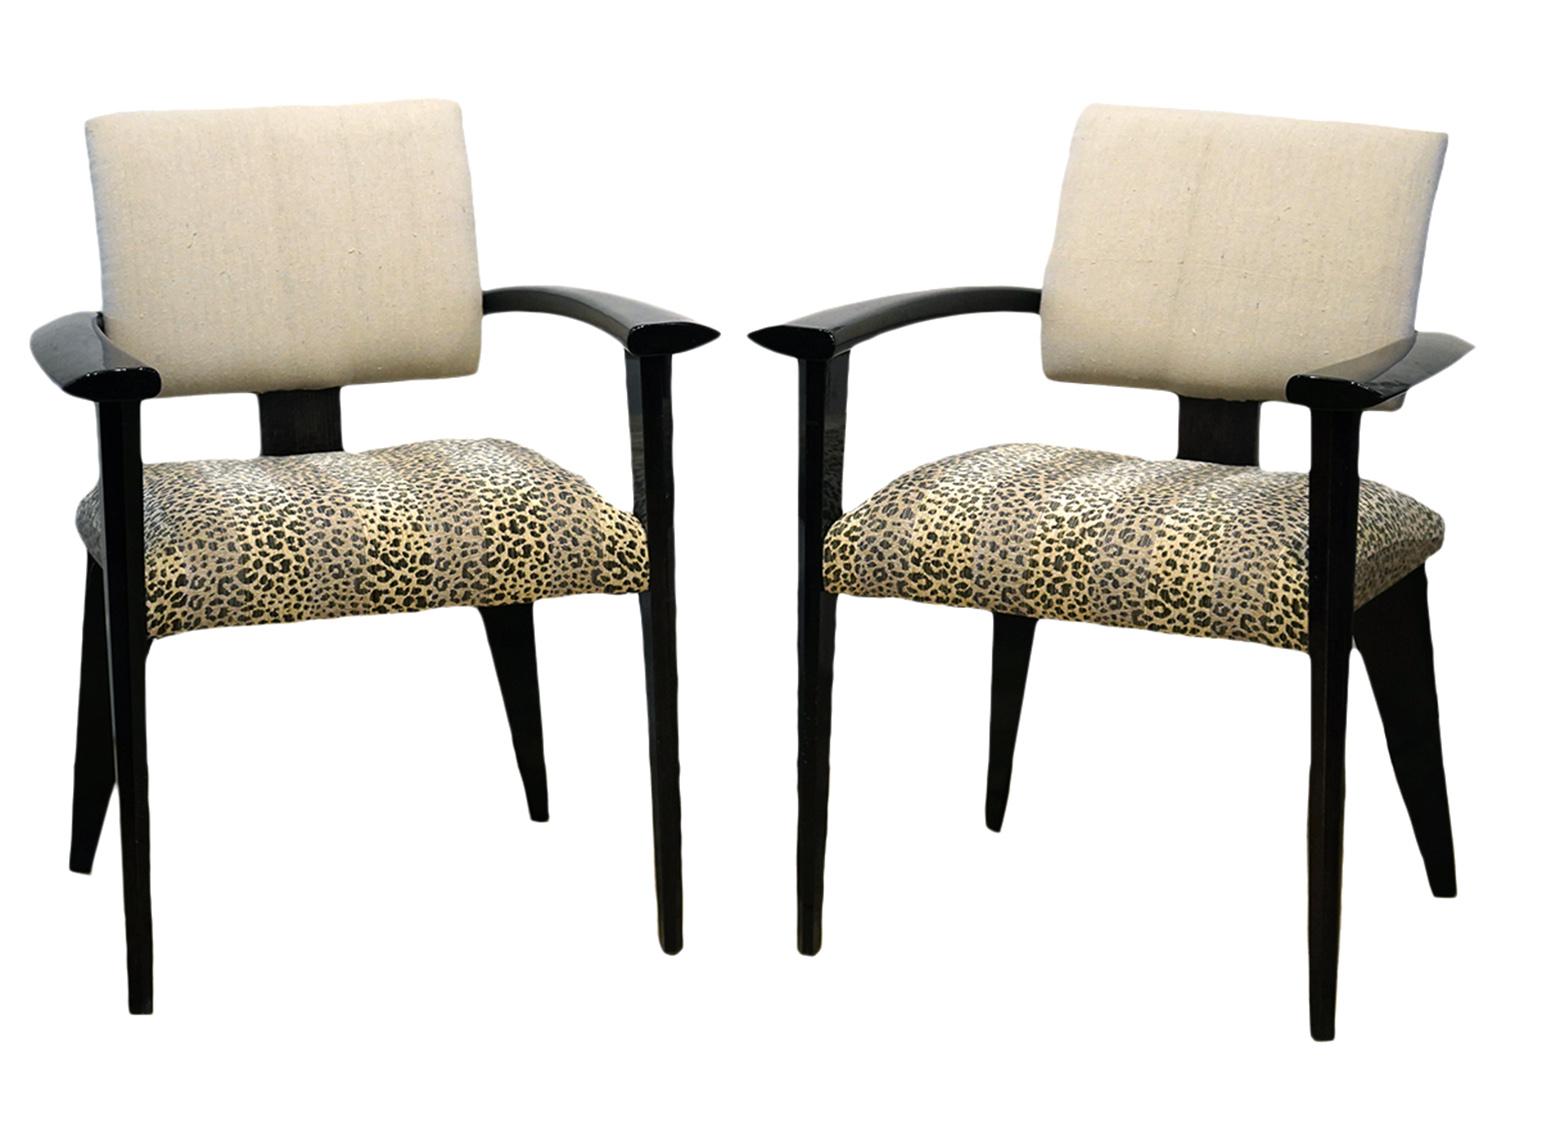 These elegant Italian chairs feature wide air-wing shaped armrests continuing around the back, upholstered seats and backrests resting on modern faceted geometric legs. The framework is lacquered in a way that let the wood grain shine through. The